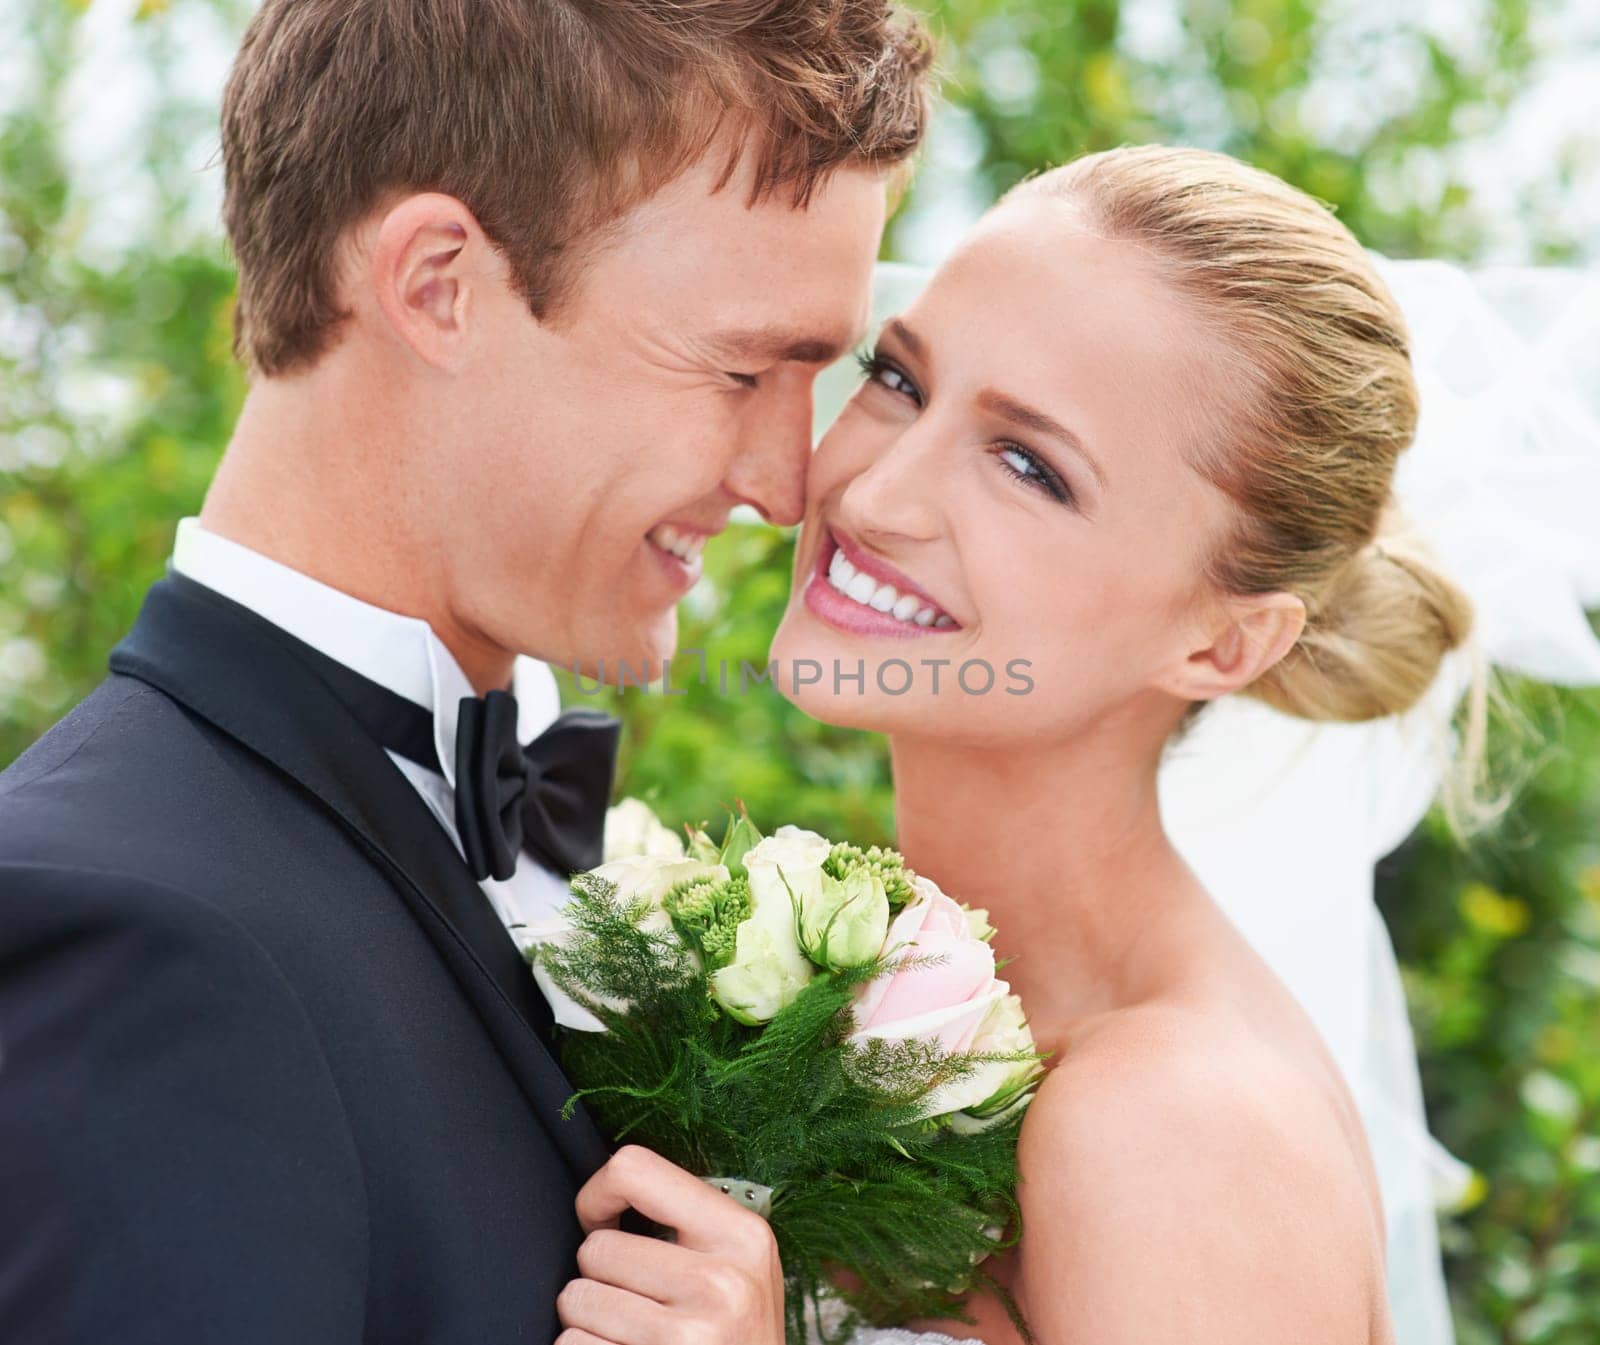 Couple, happy and affection at wedding celebration in outdoors, together and smiling in nature. Bride, portrait and commitment to relationship with marriage, love and romance at outside ceremony by YuriArcurs